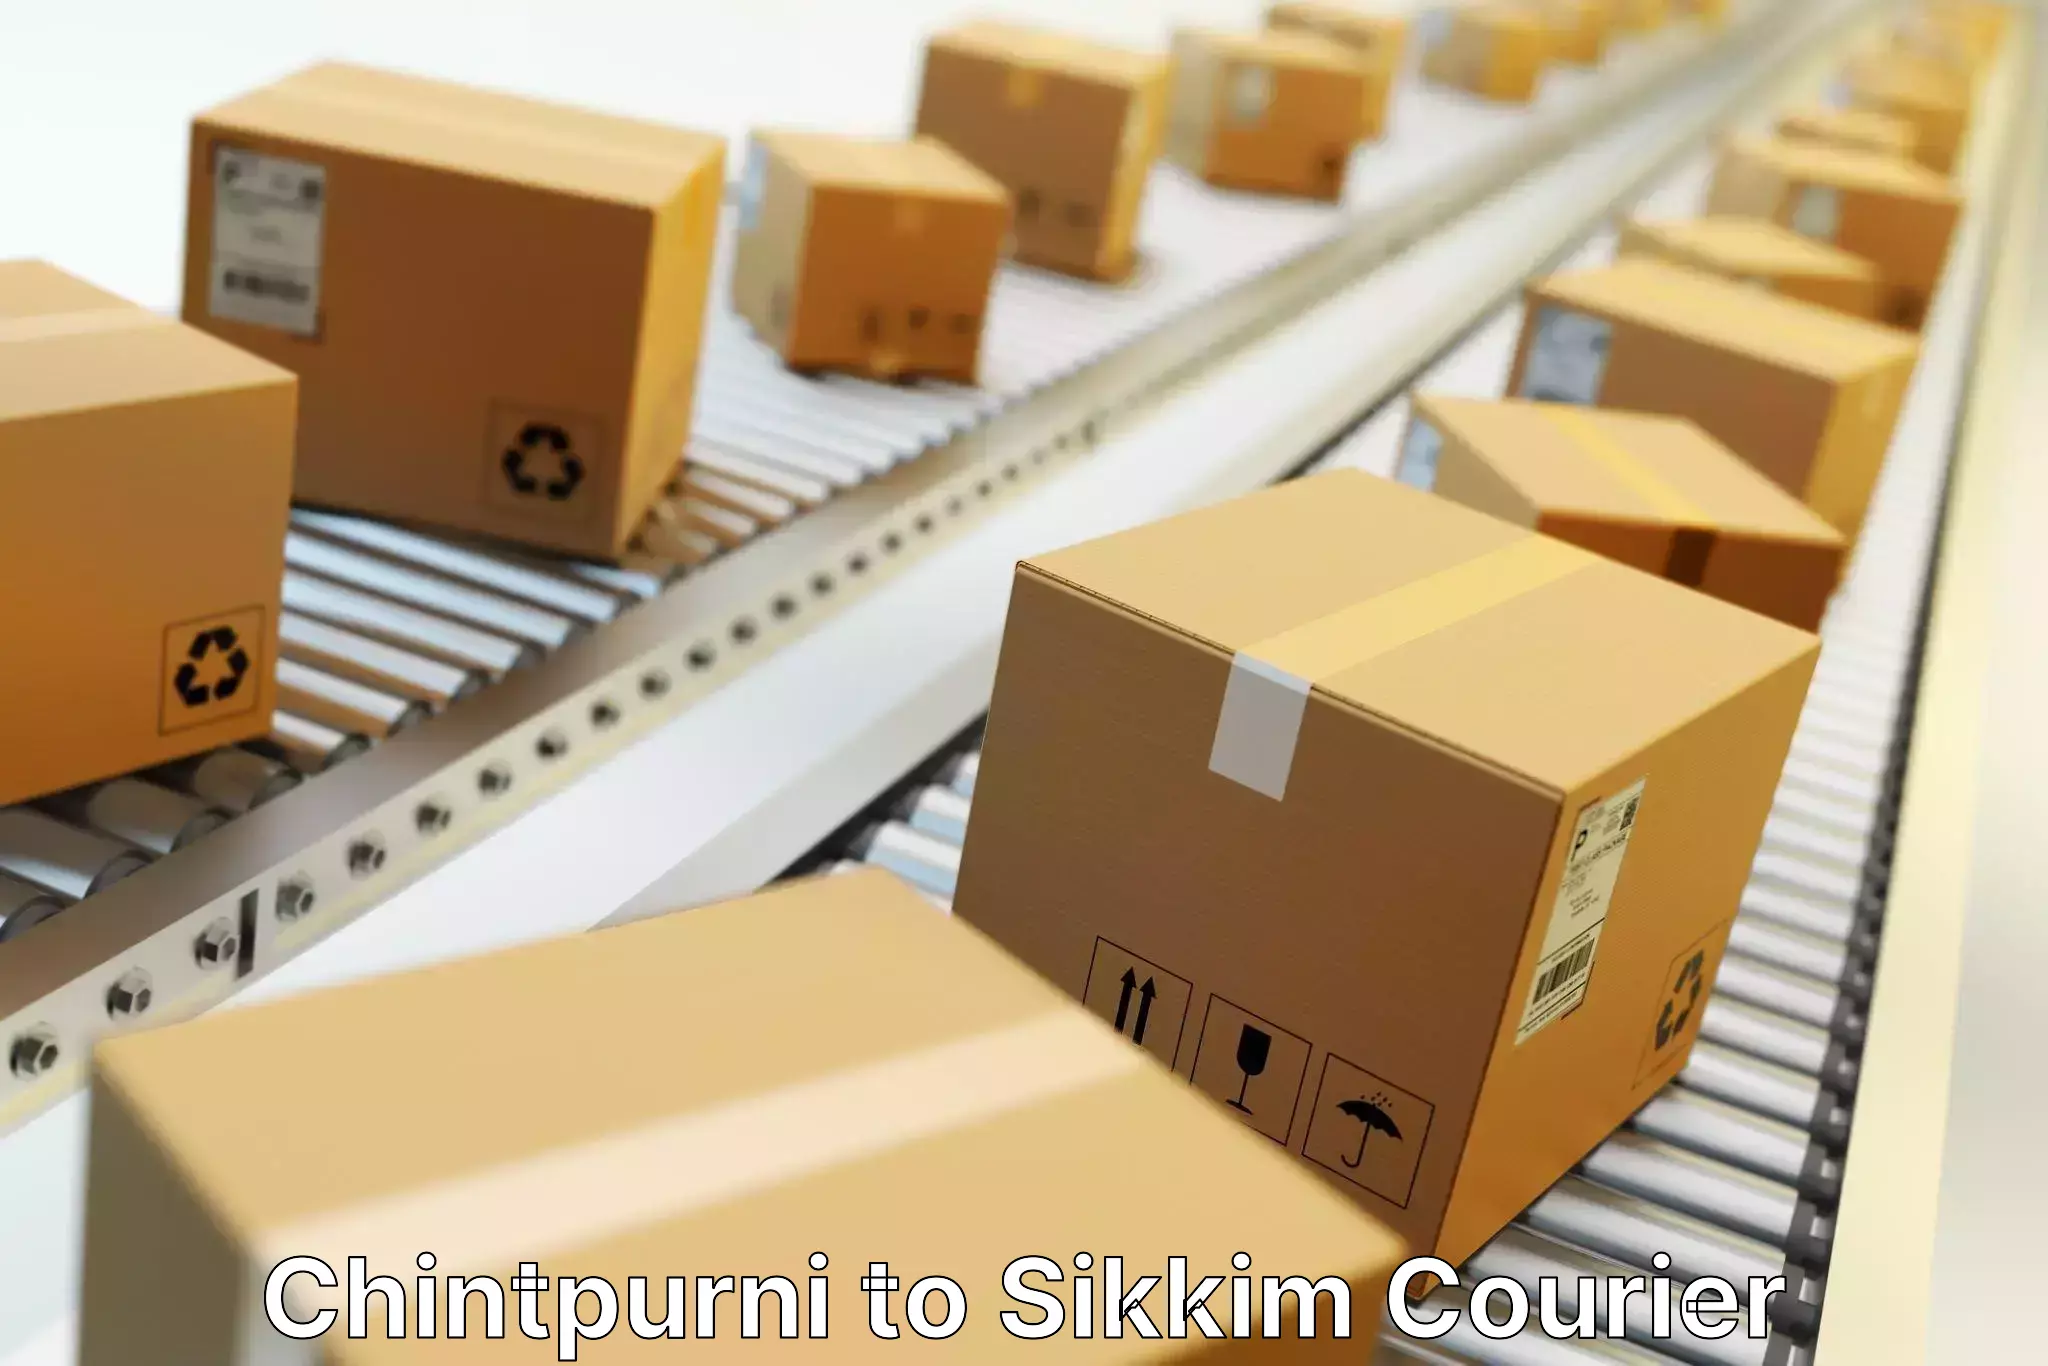 High-priority parcel service Chintpurni to East Sikkim